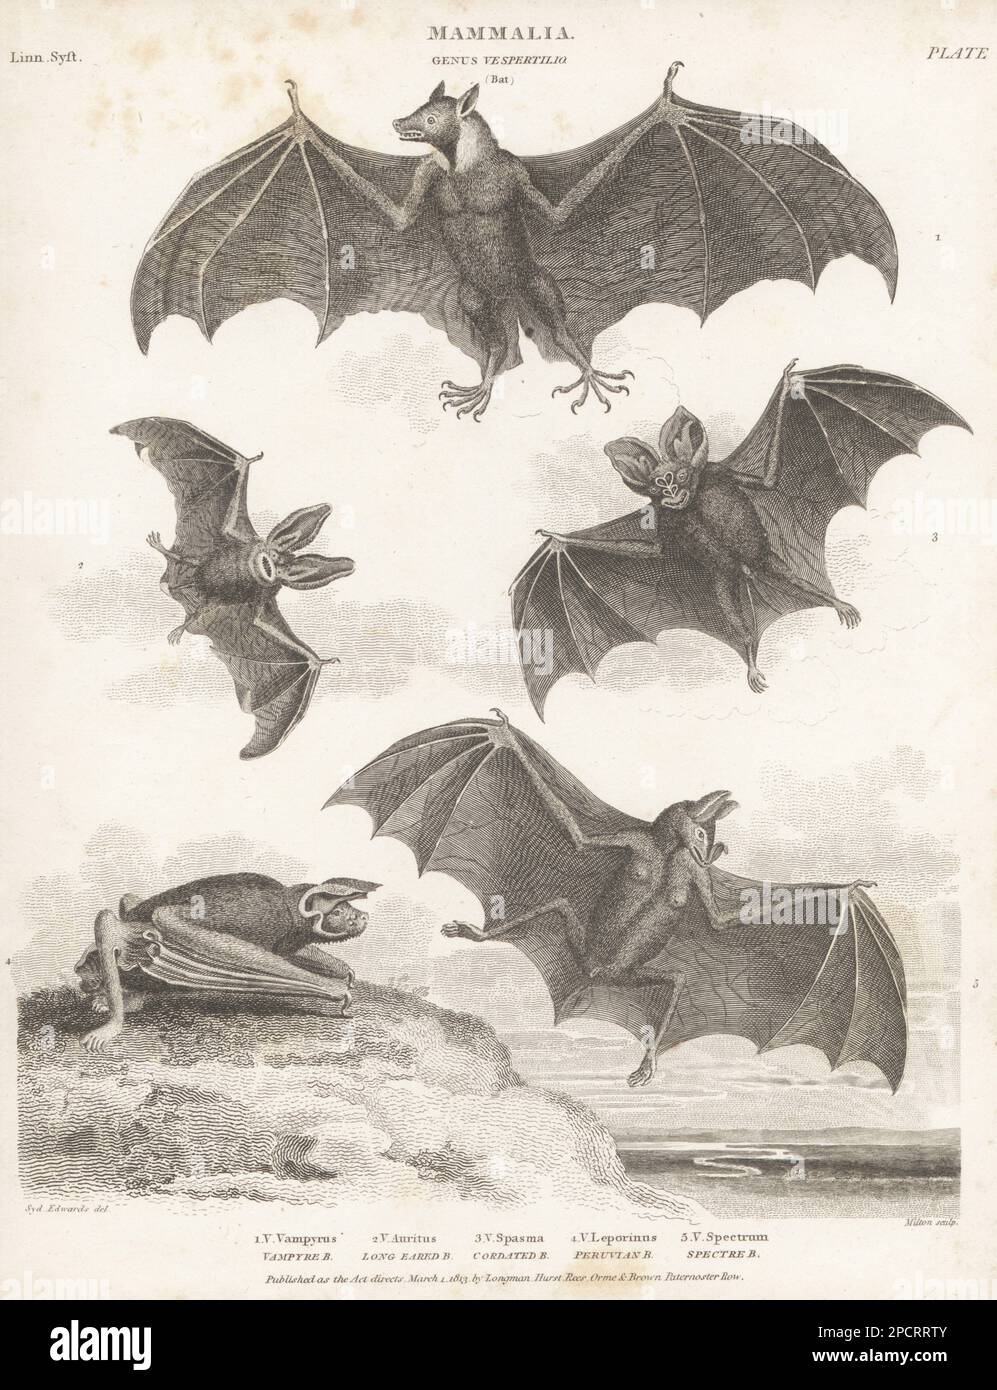 Endangered large flying fox, Pteropus vampyrus 1, long-eared bat, Plecotus auritus 2, Asian ghost bat, Megaderma spasma 3, greater bulldog bat, Noctilio leporinus 4 and faux vampire, Vampyrum spectrum 5. Copperplate engraving by Thomas Milton after an illustration by Sydenham Edwards from Abraham Rees' Cyclopedia or Universal Dictionary of Arts, Sciences and Literature, Longman, Hurst, Rees, Orme and Brown, Paternoster Row, London, March 1, 1813. Stock Photo